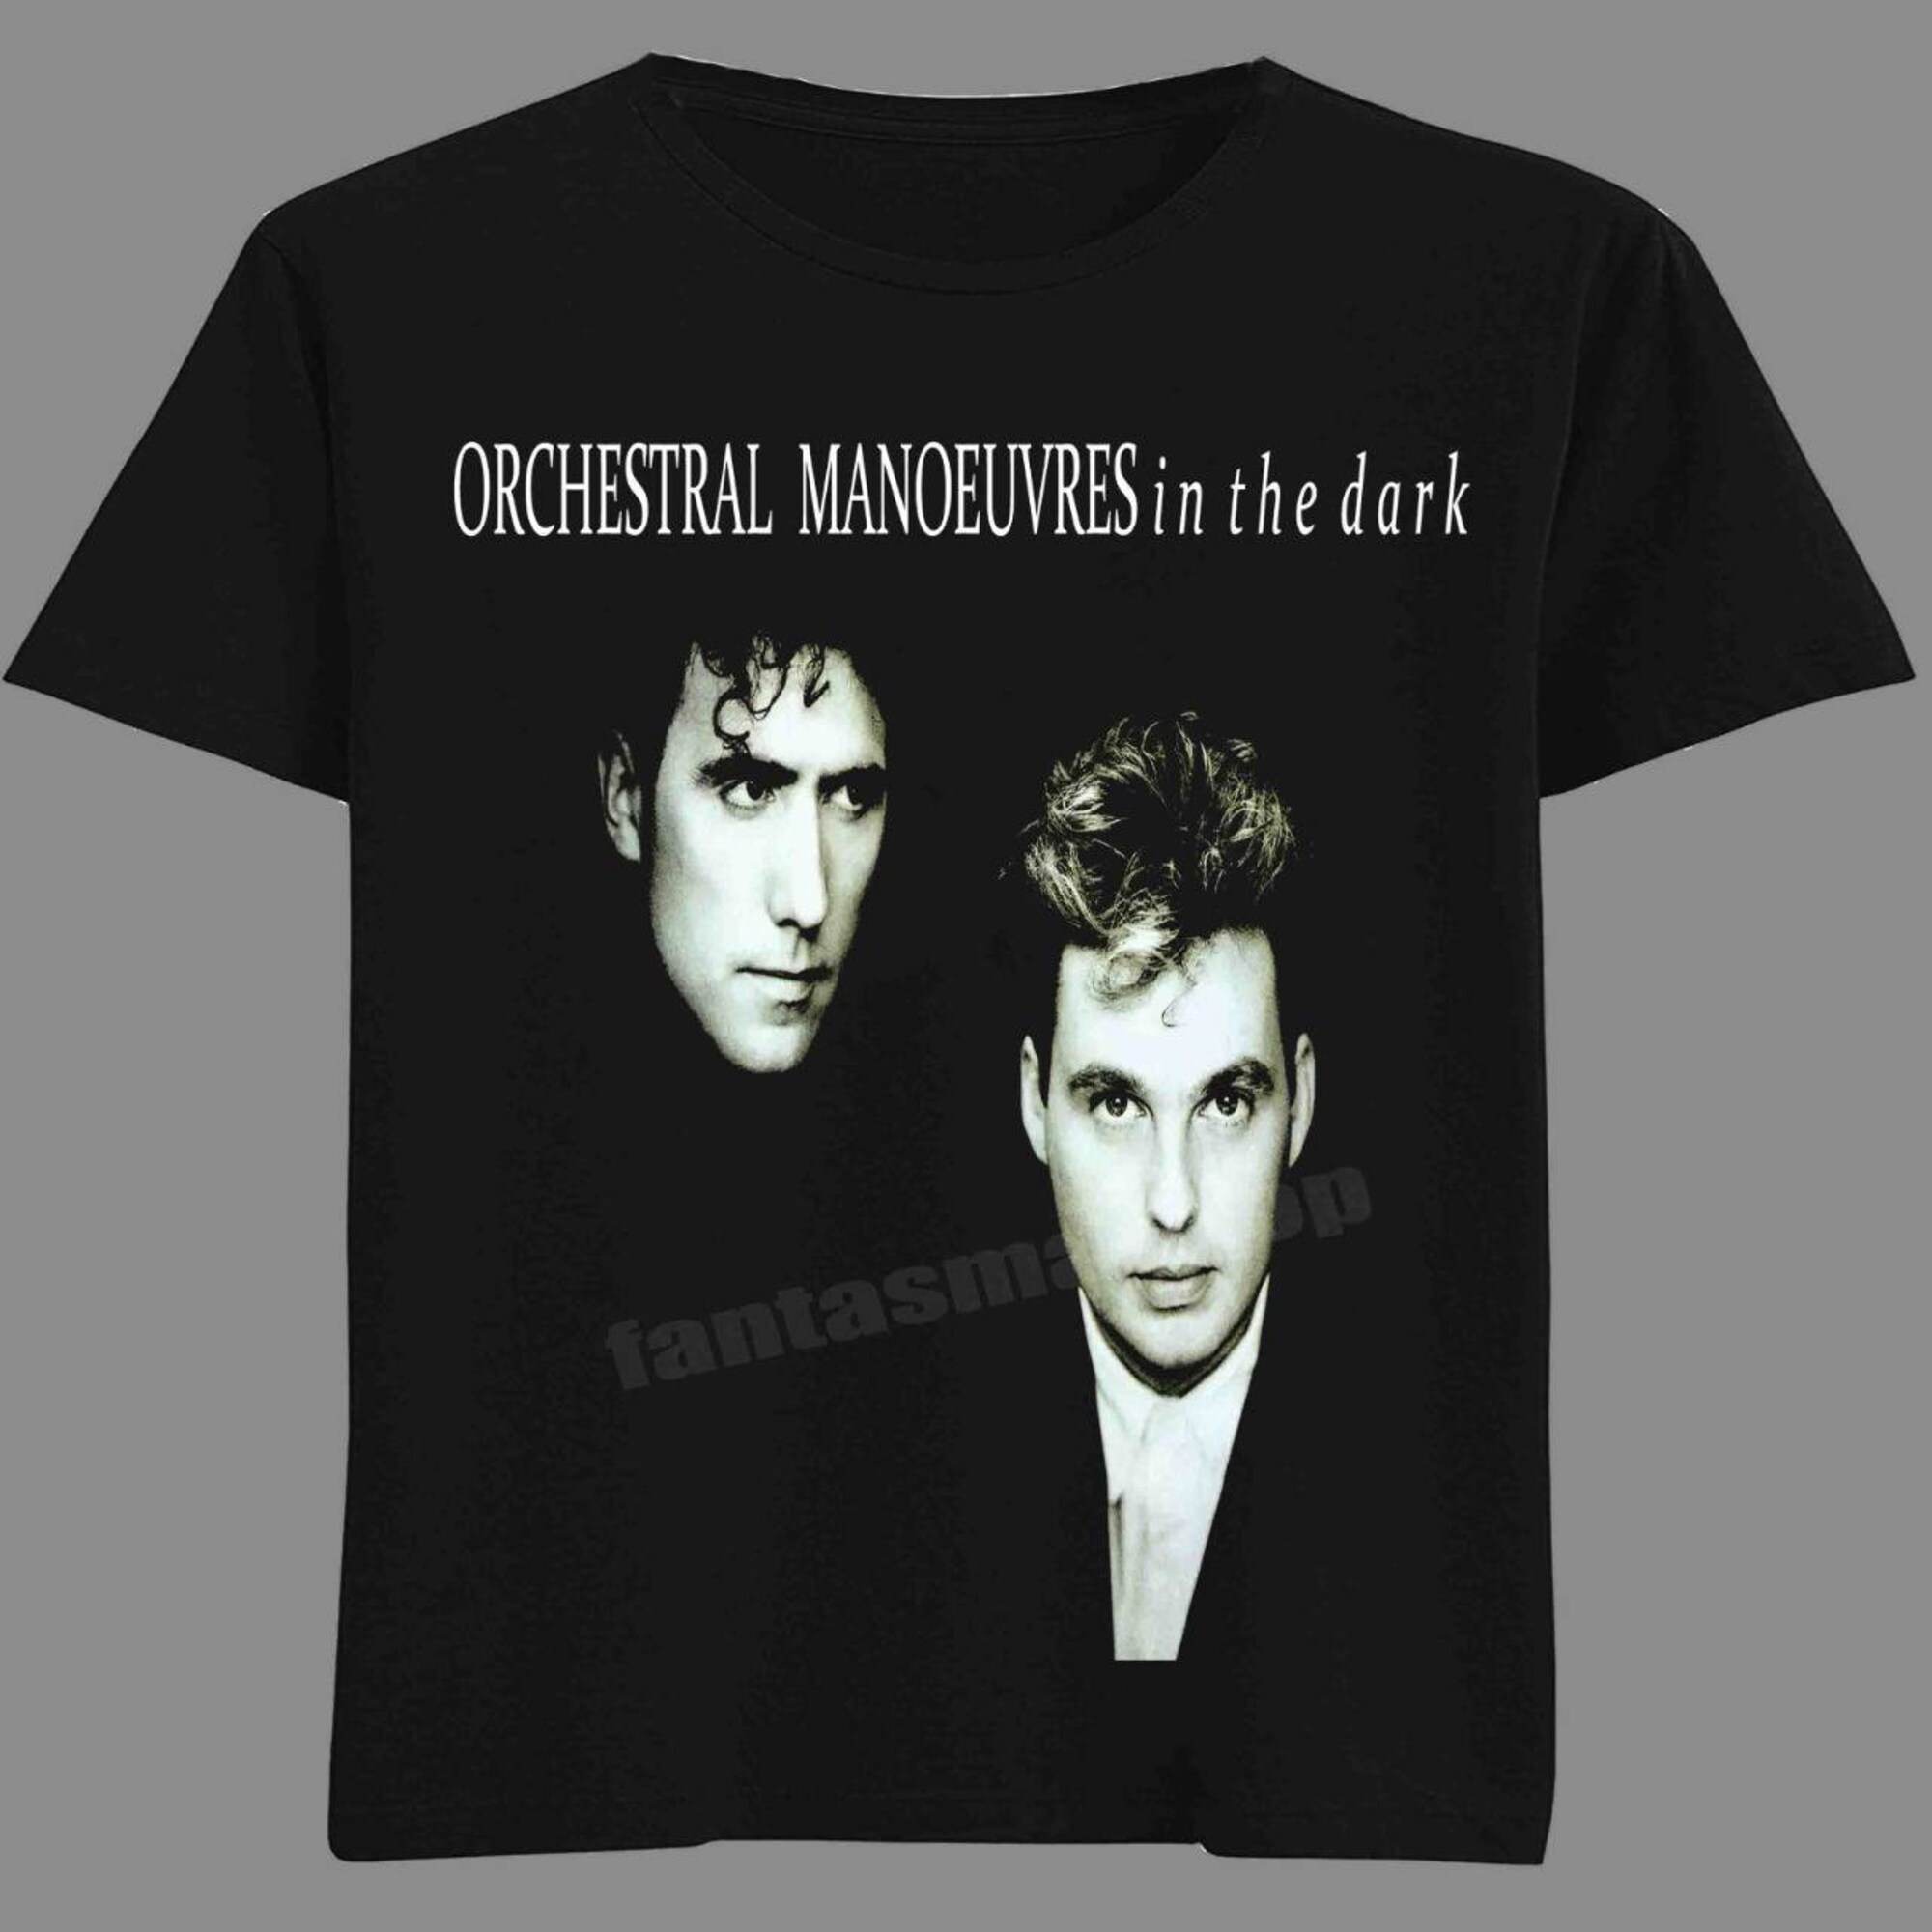 Orchestral Manoeuvres in the Dark tshirt